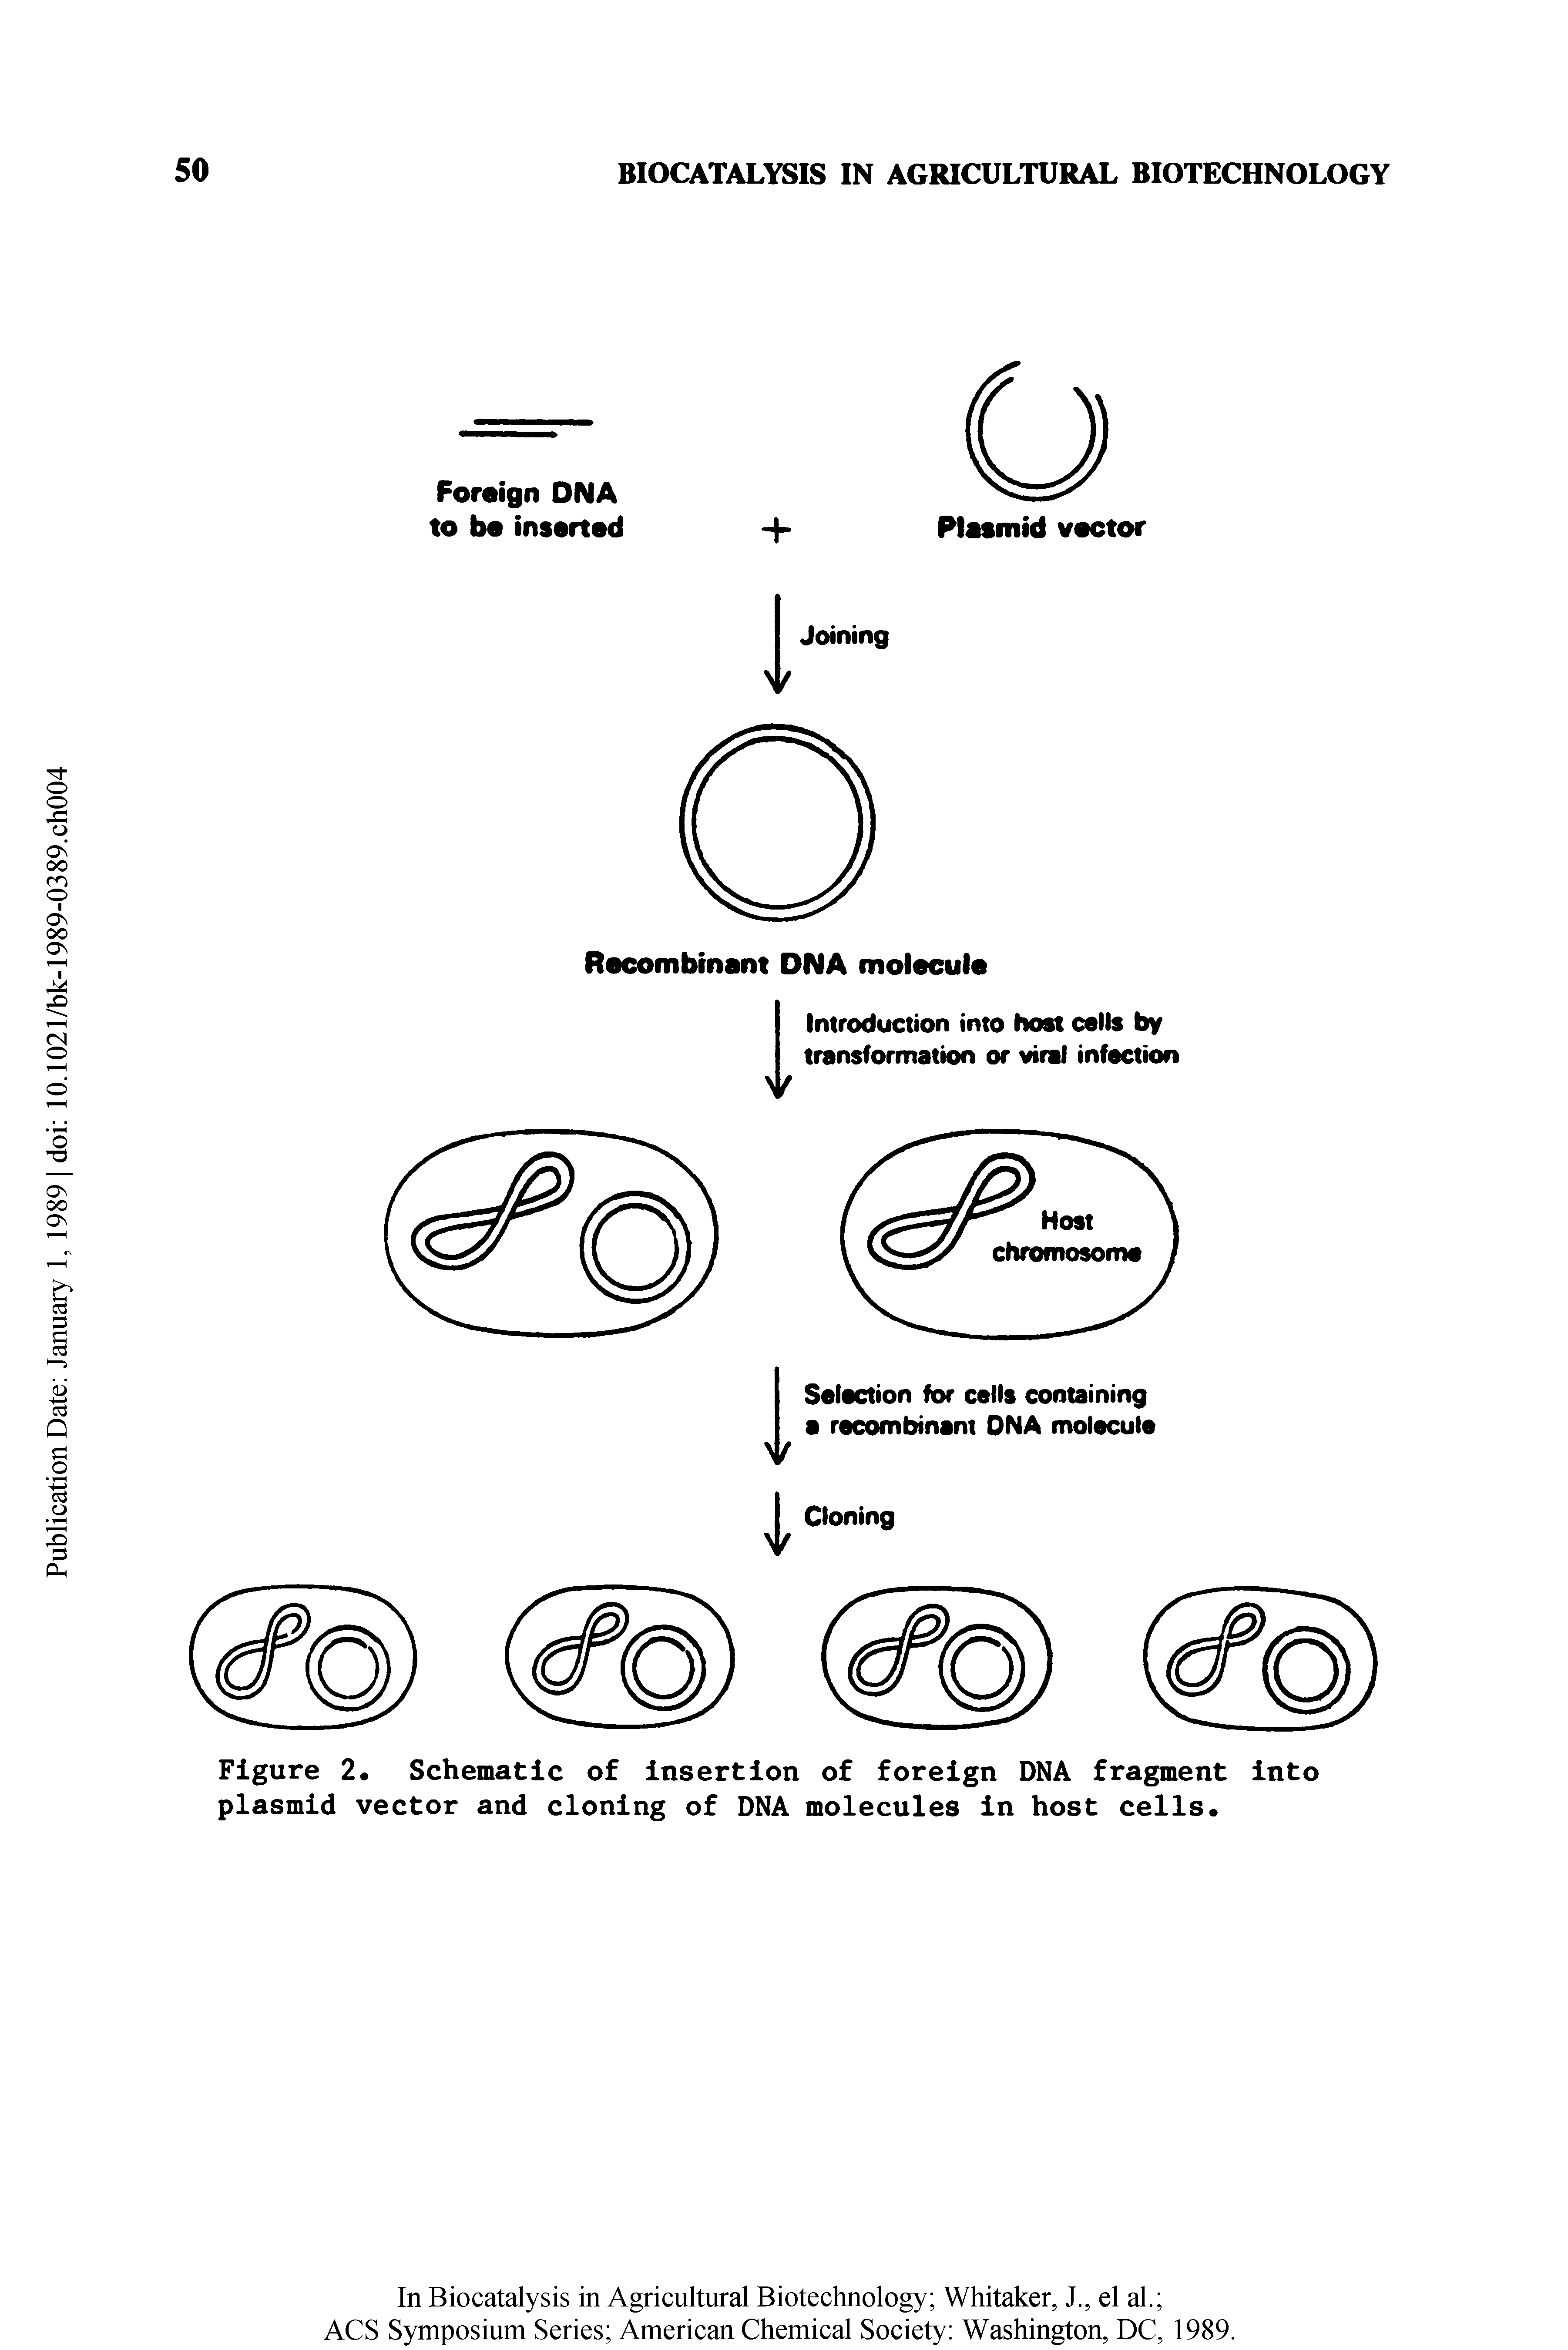 Figure 2. Schematic of insertion of foreign DNA fragment into plasmid vector and cloning of DNA molecules in host cells.